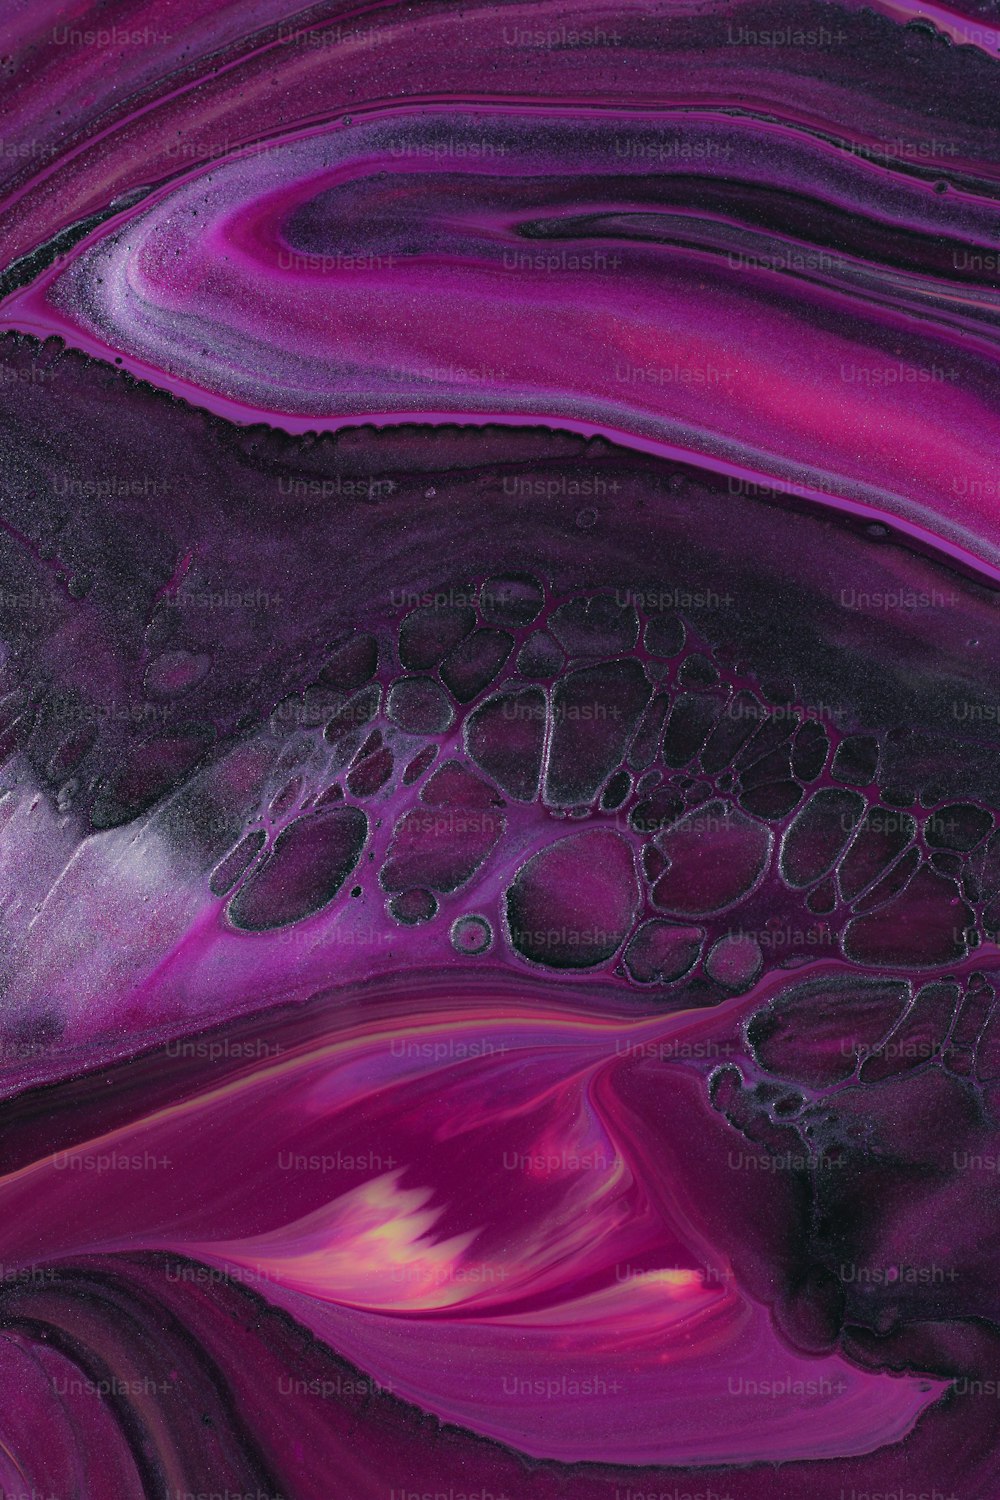 a close up of a purple and black substance